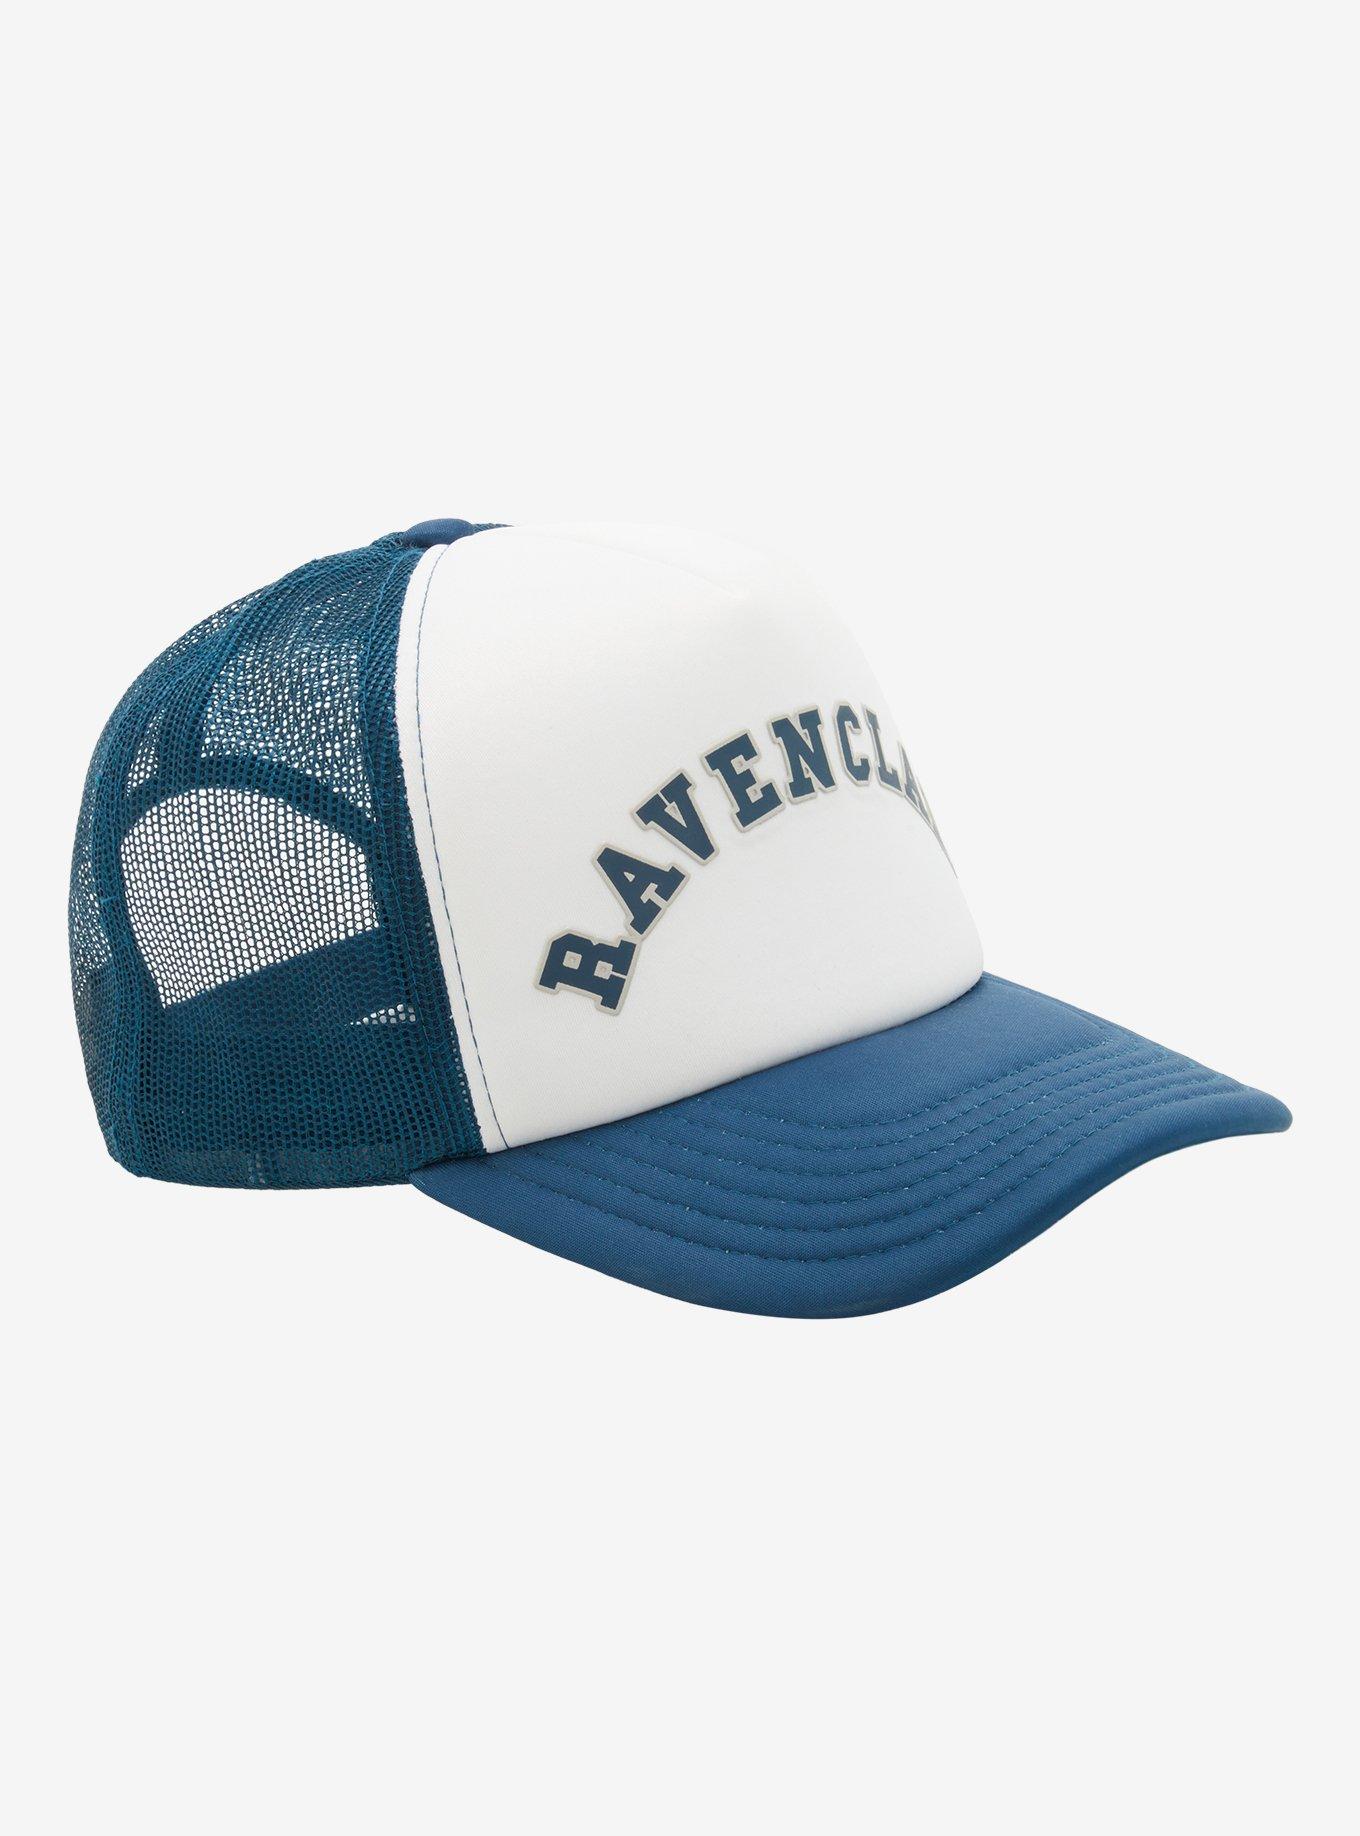 Potter - BoxLunch Harry Ravenclaw BoxLunch Cap Trucker Collegiate Exclusive |